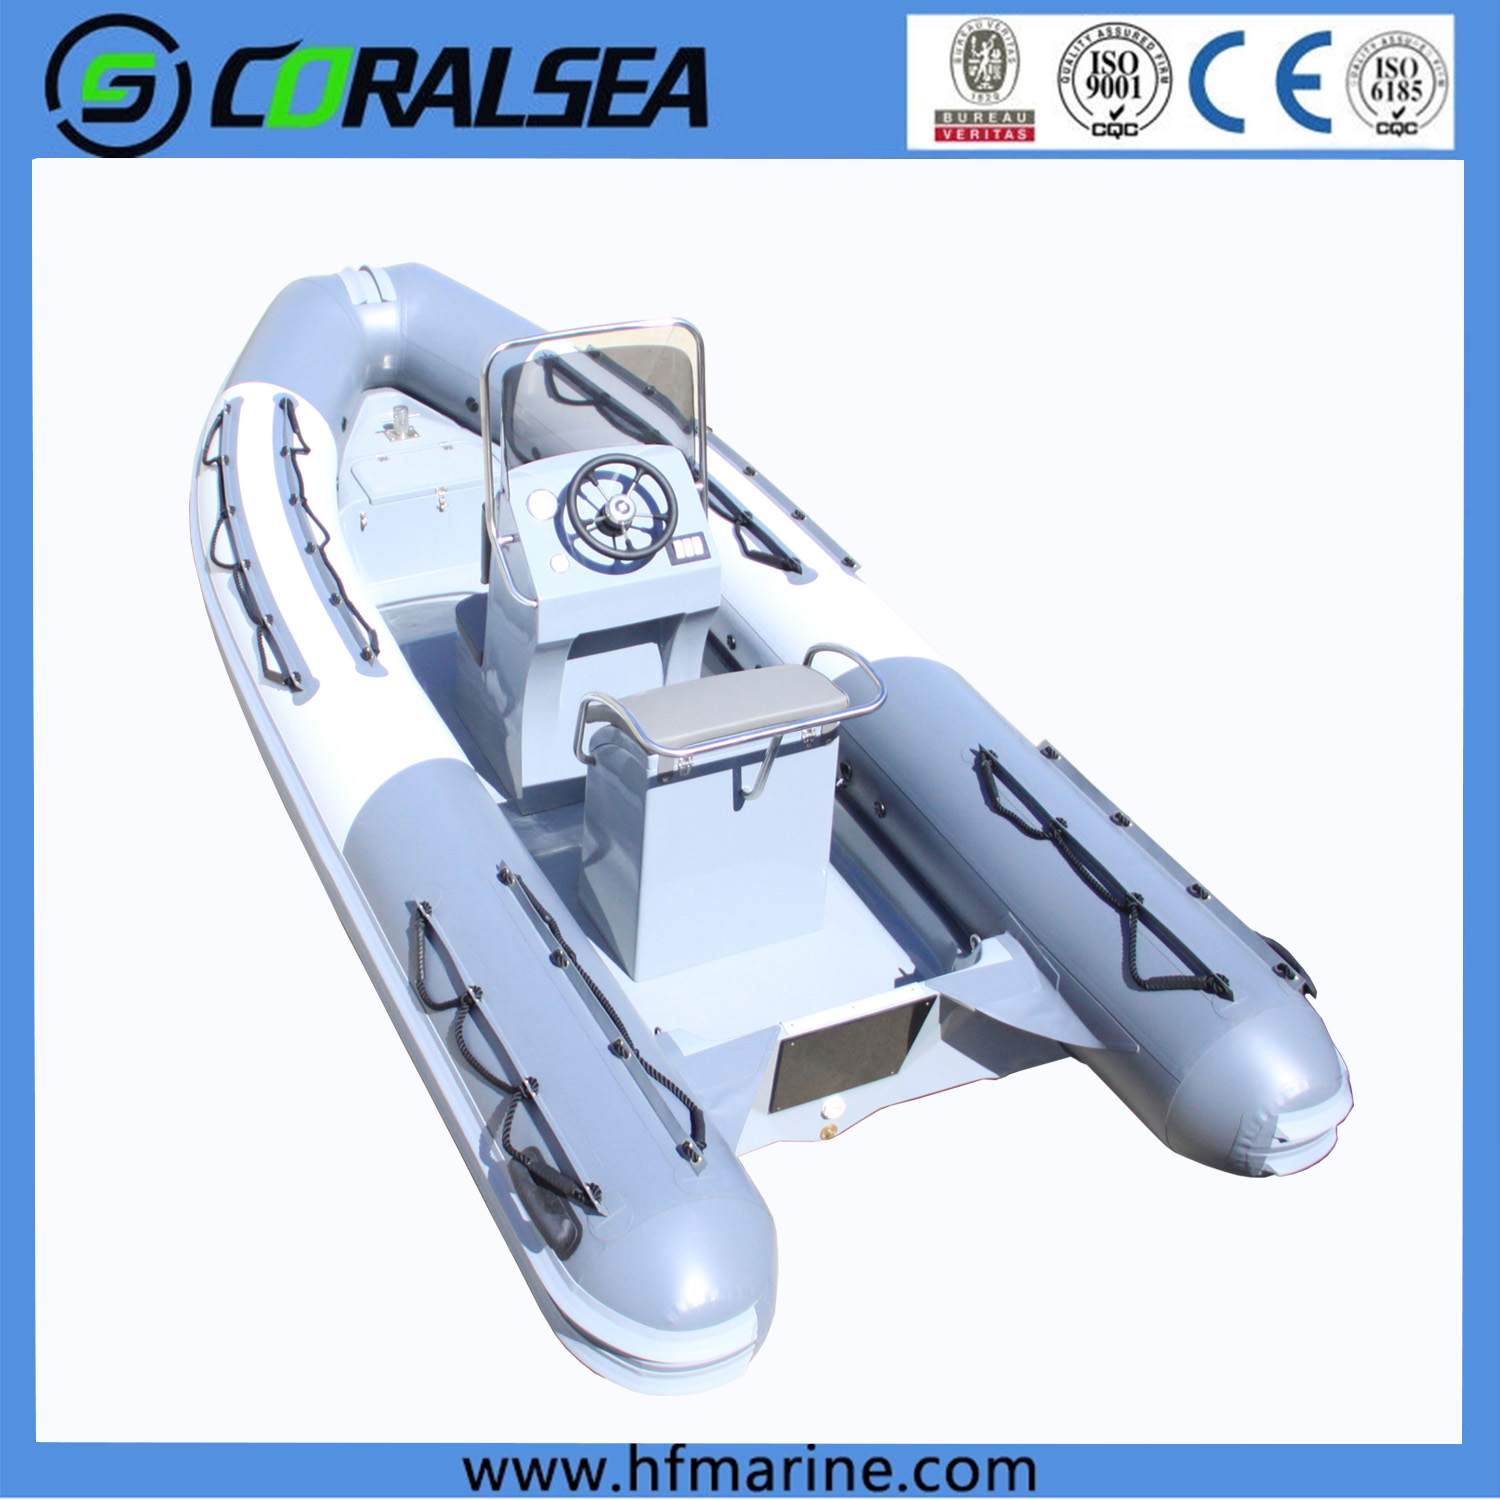 Wholesale China Hypalon Rib Factory – Fiberglass -hull Hypalon RIB leisure/  sport/ fishing/ diving/ rescue boat – CORALSEA Manufacturer and Supplier